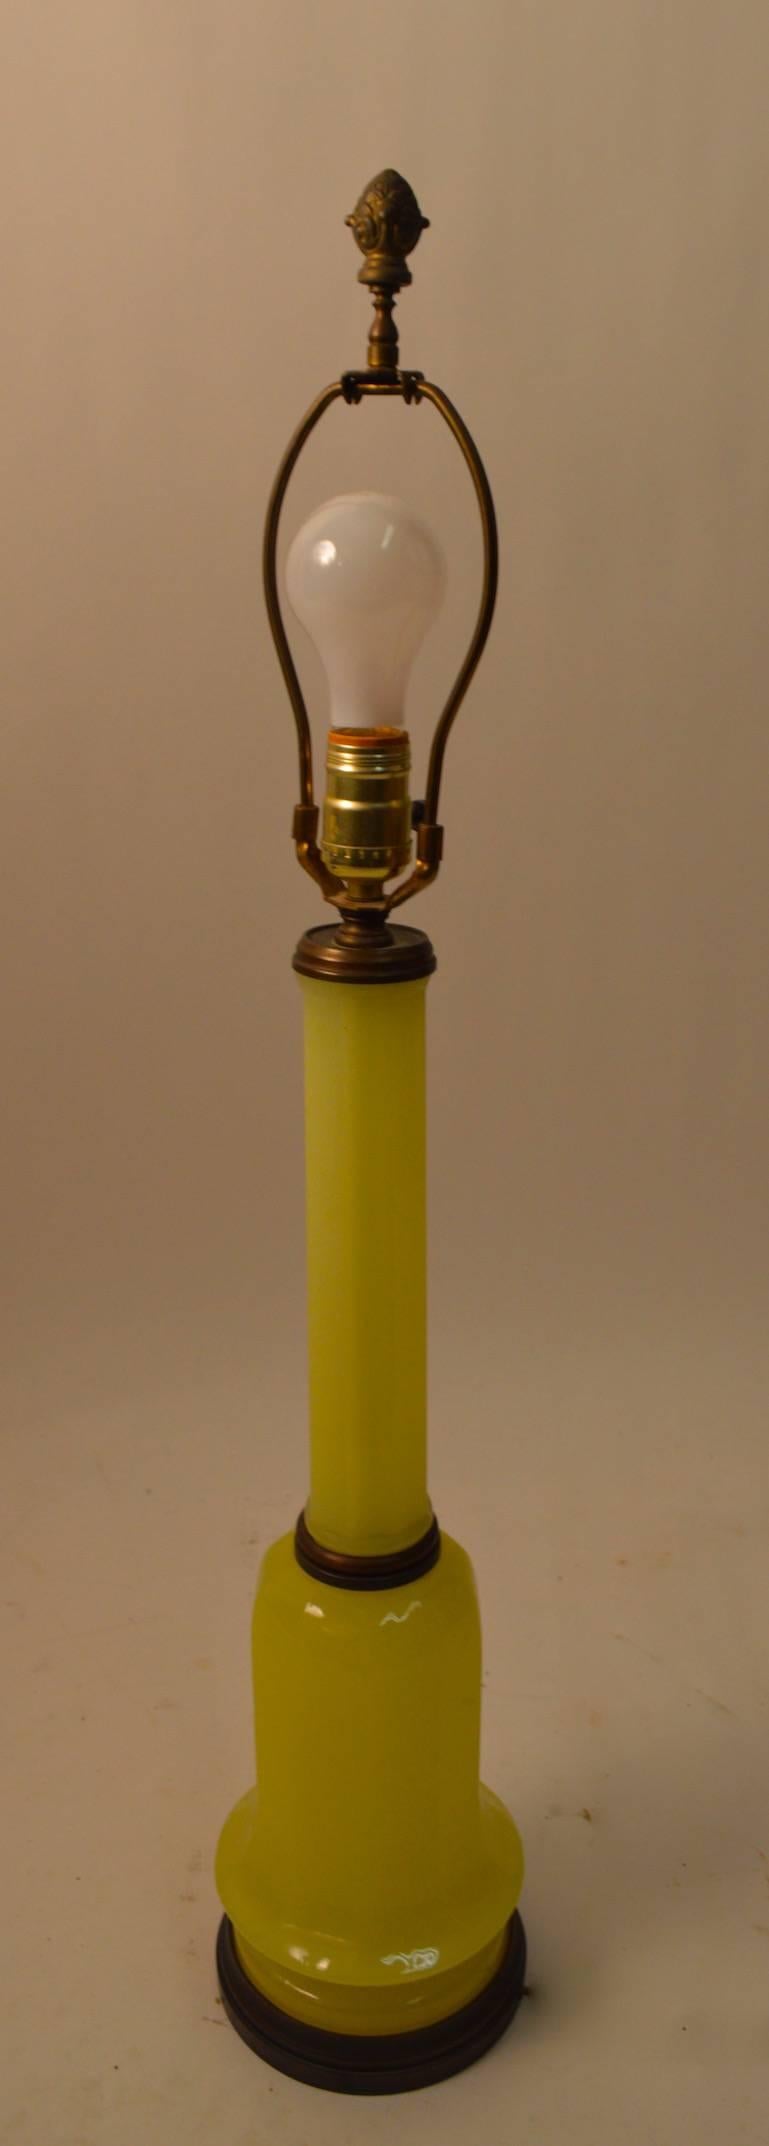 Elegant single glass lamp attributed to Paul Hanson, in yellow glass with brass trim. Original, working condition, shade not included. Height to top of socket 24.5